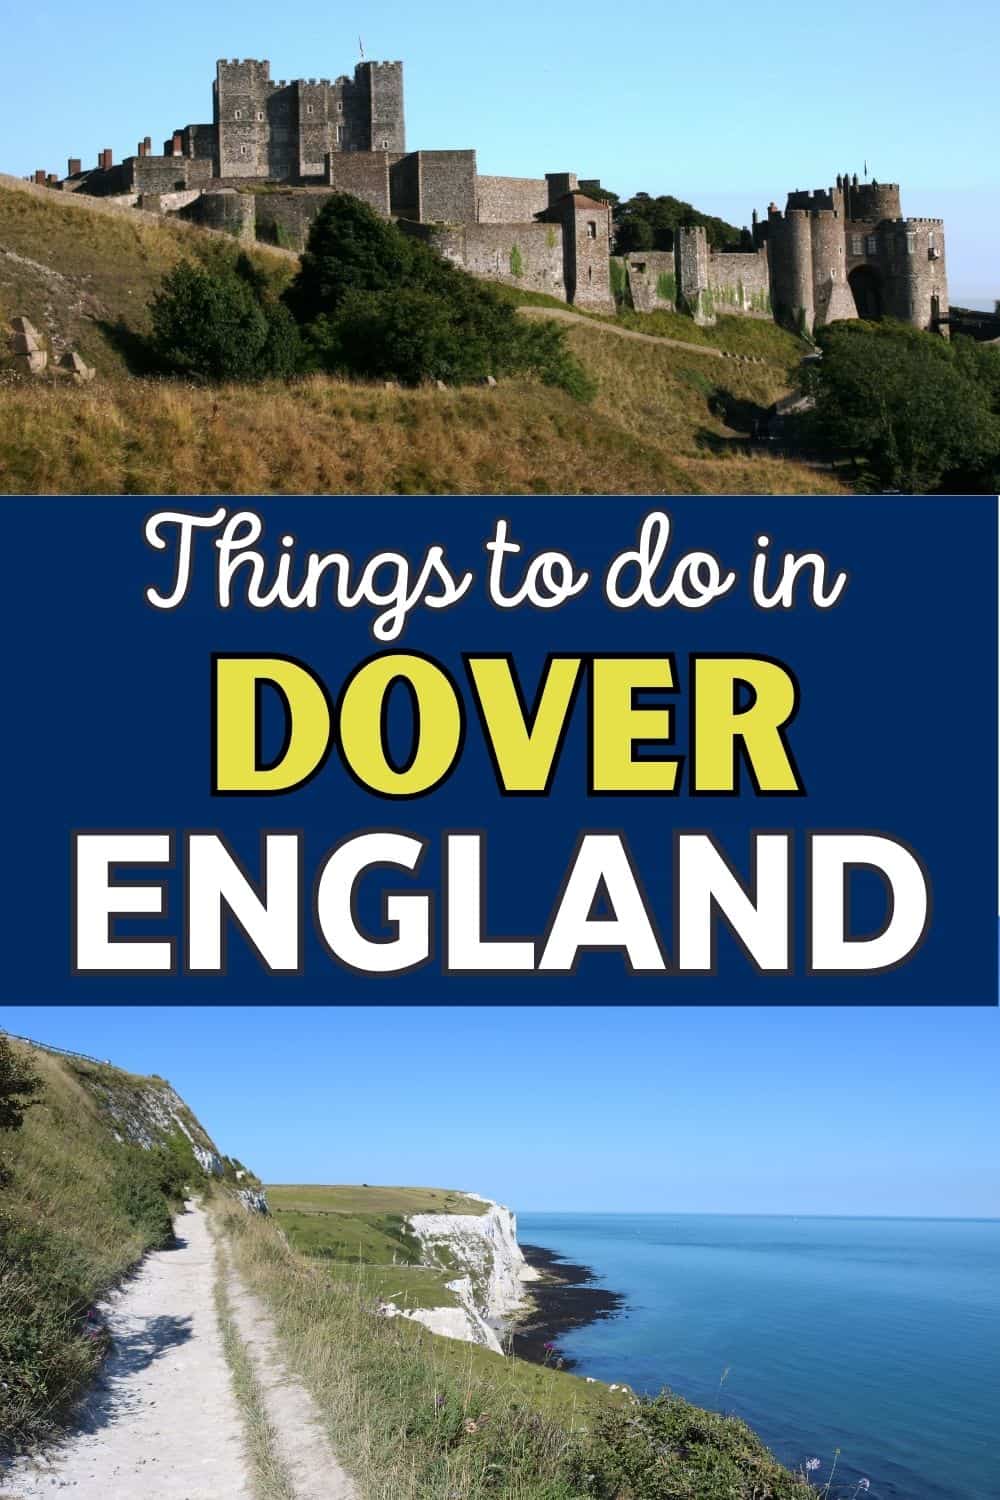 Things to do in Dover, England